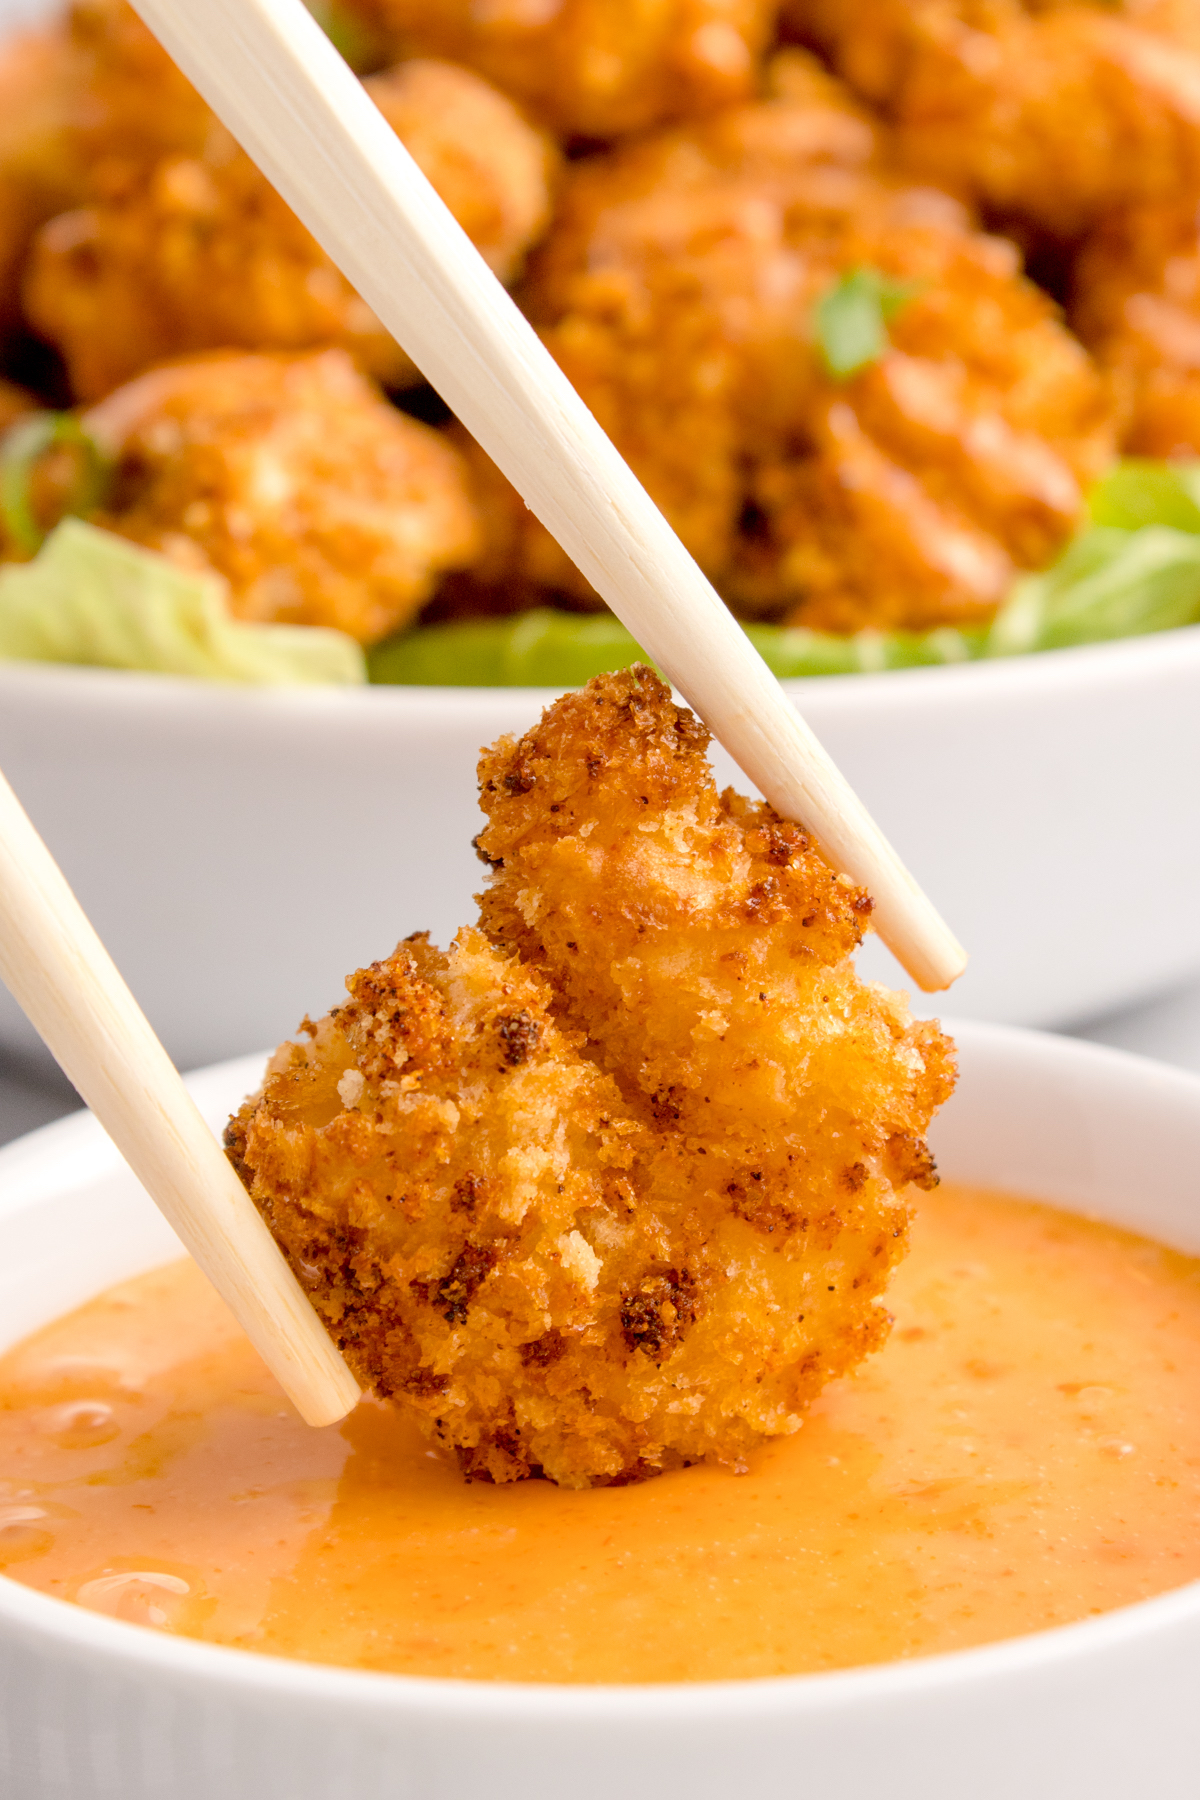 A pair of chopsticks holds a crispy breaded shrimp that's being dipped in a bowl or orange colored bang bang sauce.